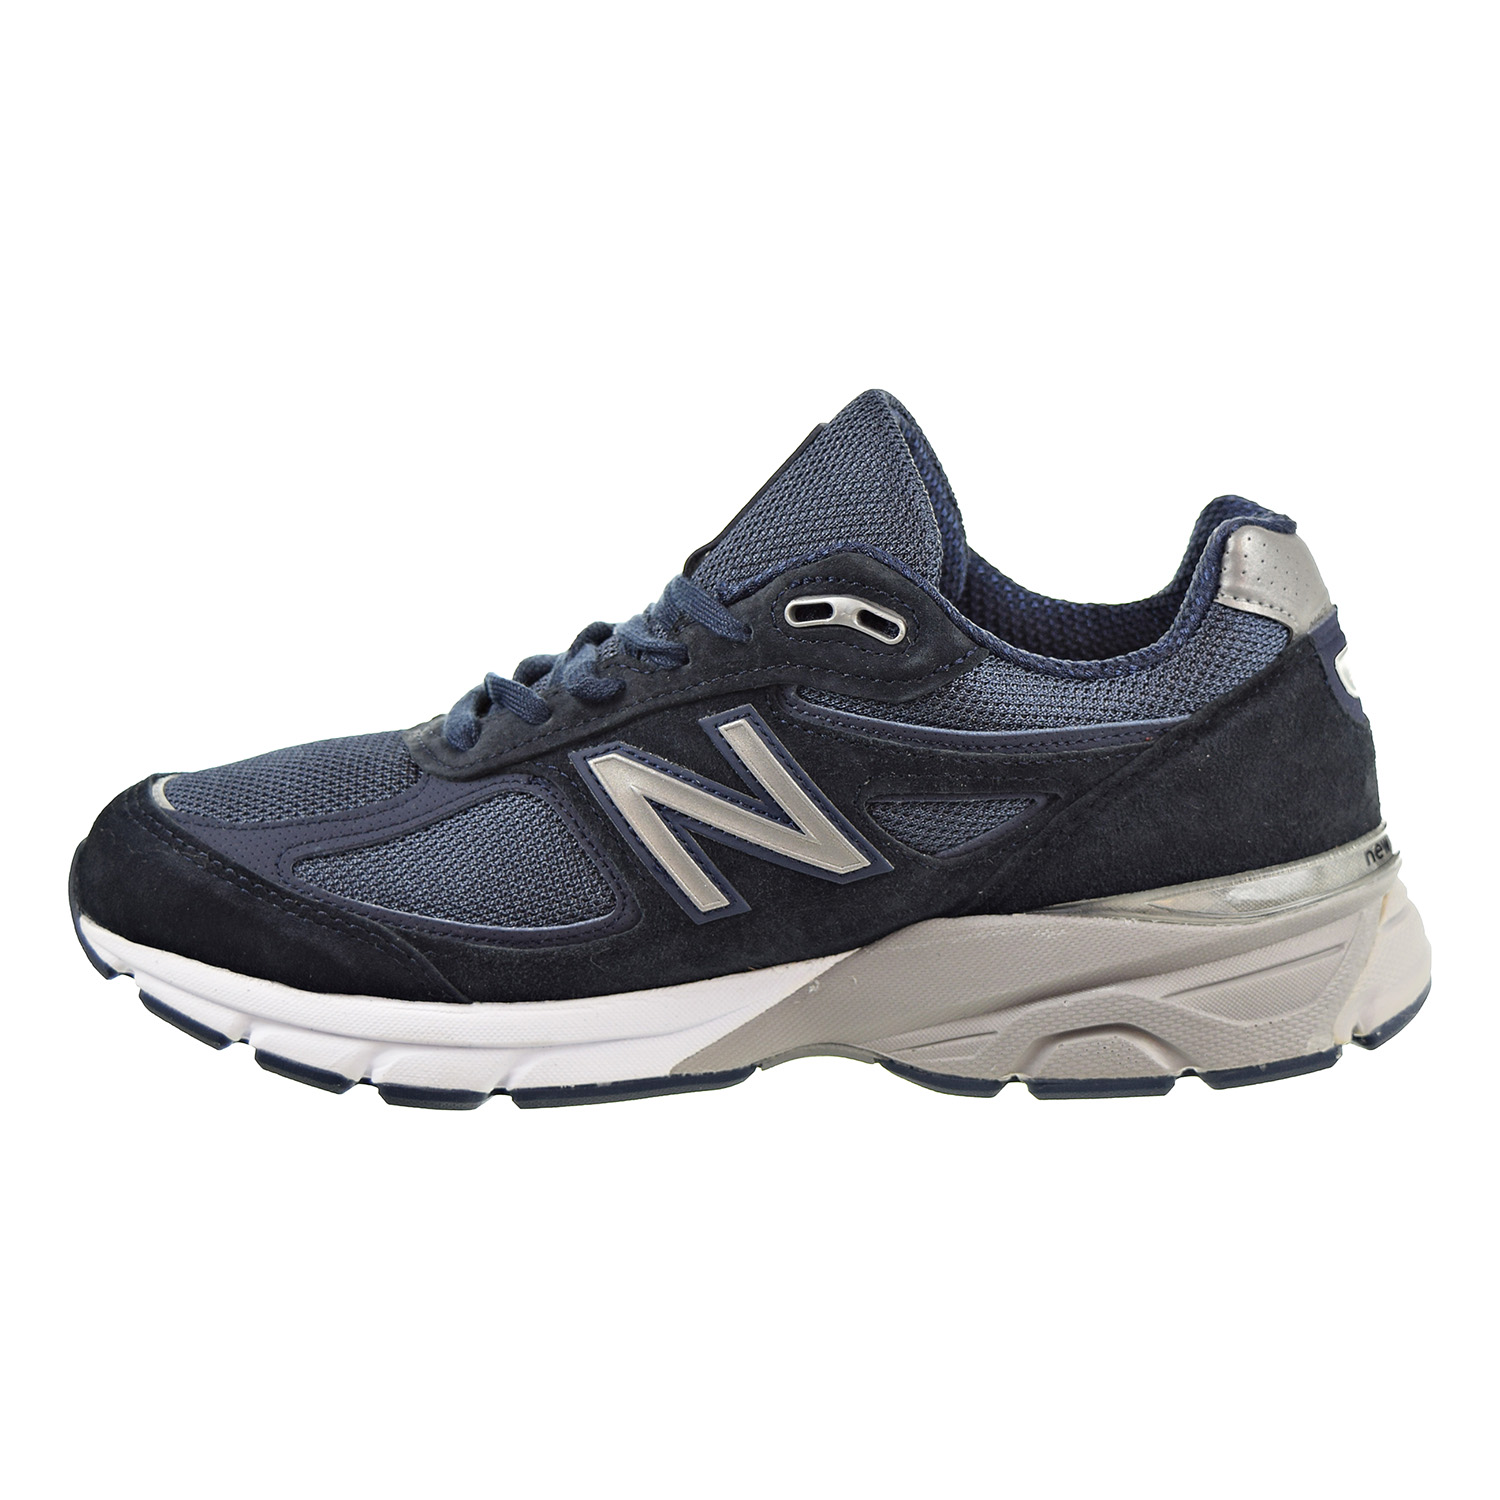 New Balance 990v4 Men's Running Stability Shoes Navy / Silver Made in ...